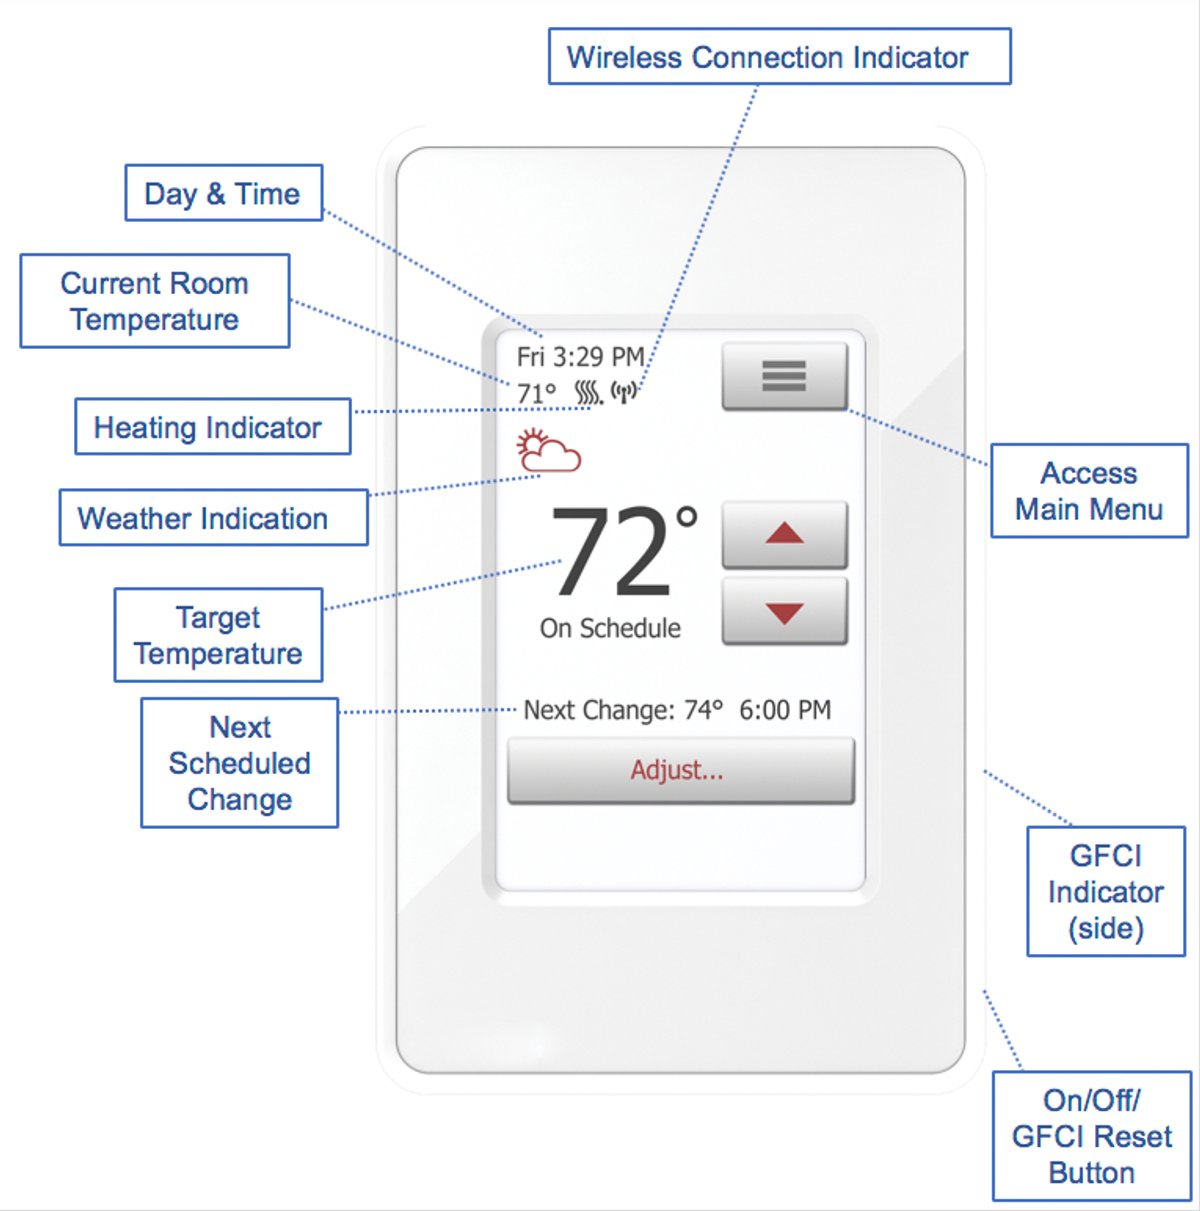 https://ik.warmlyyours.com/img/nspire-touch-wifi-floor-heating-thermostat-labeled-diagram-27a409.png?tr=w-1200